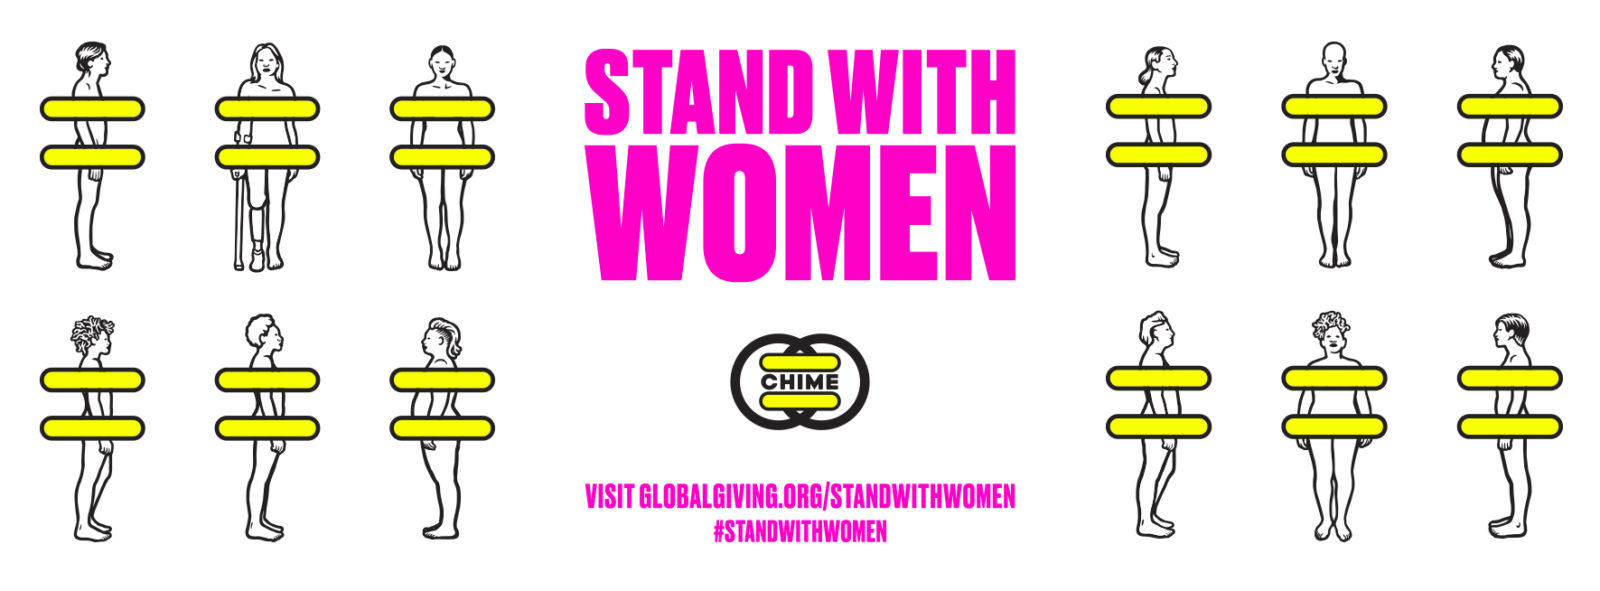 Gucci launches #StandWithWomen for victims of domestic abuse during this time